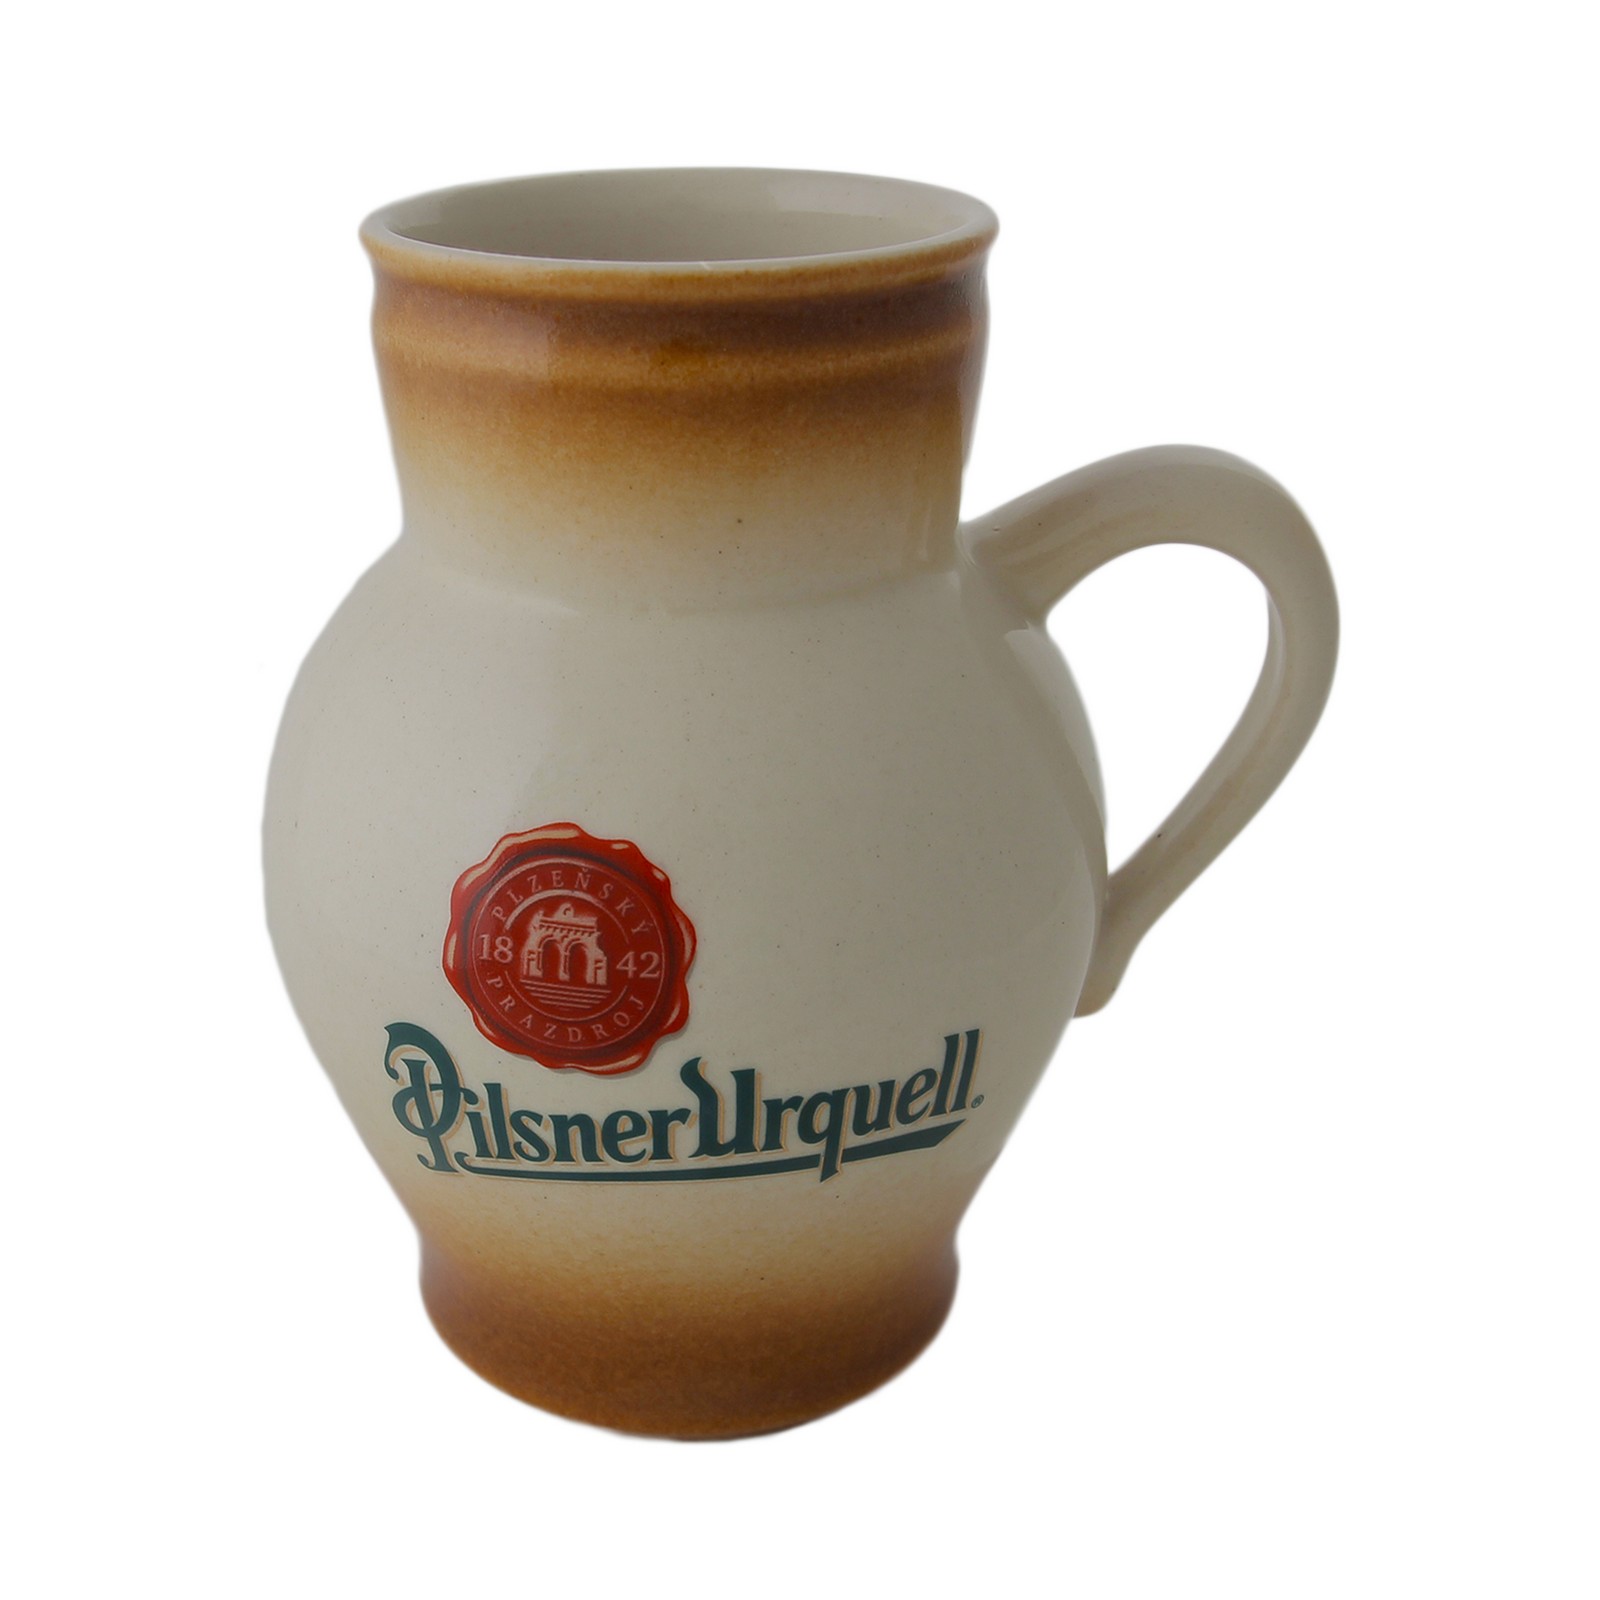 0.5 l beer pitcher with the Pilsner Urquell logo